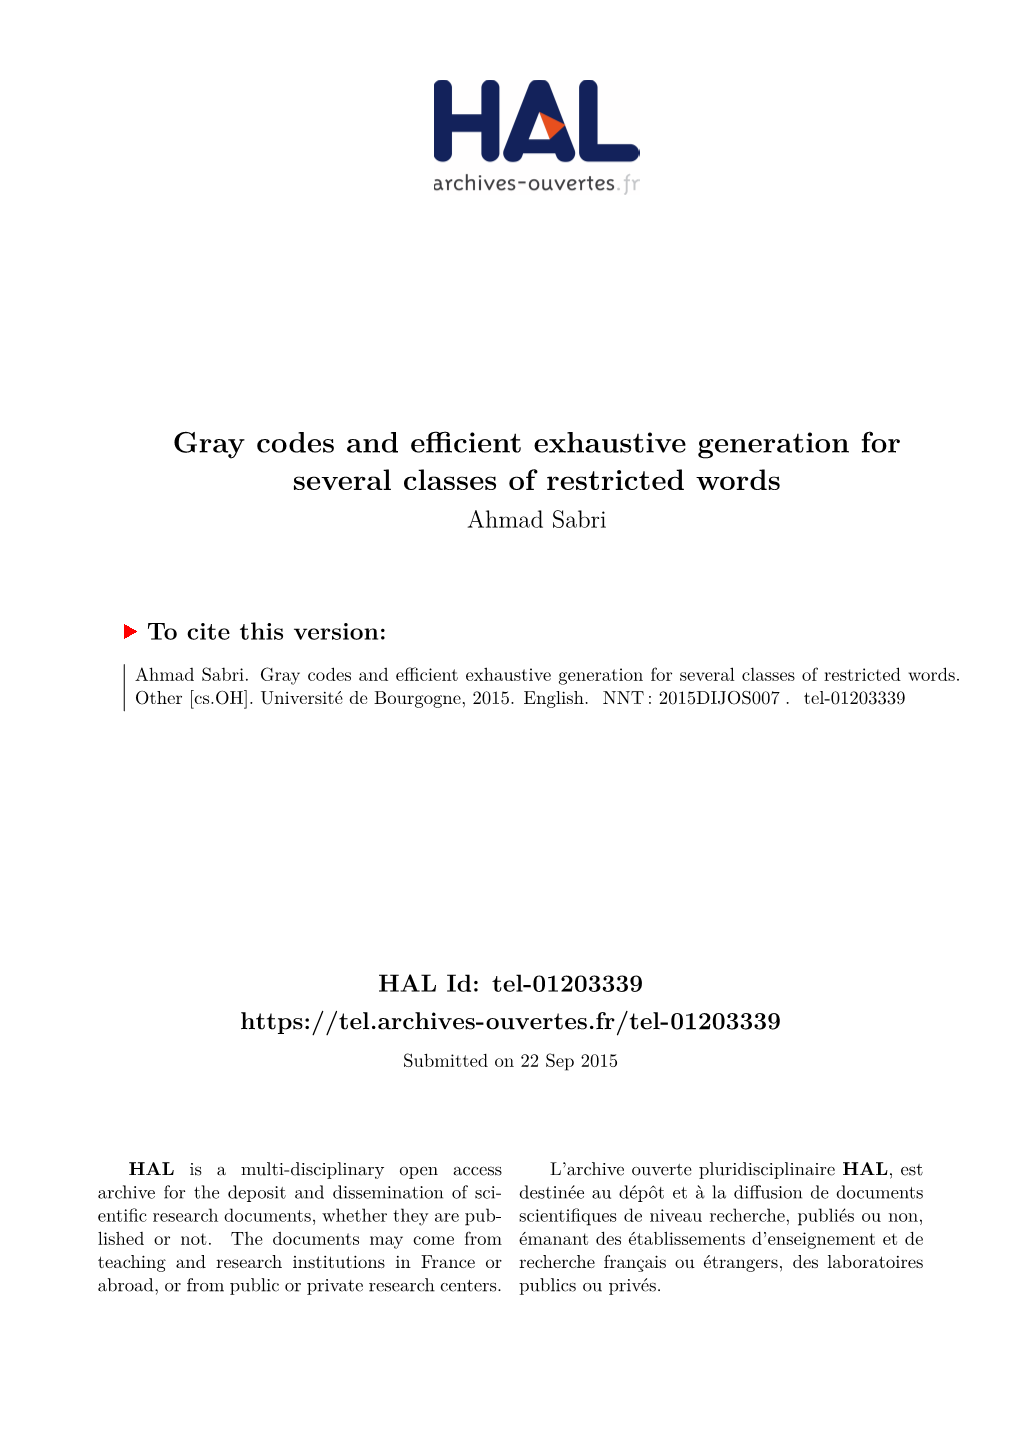 Gray Codes and Efficient Exhaustive Generation for Several Classes Of